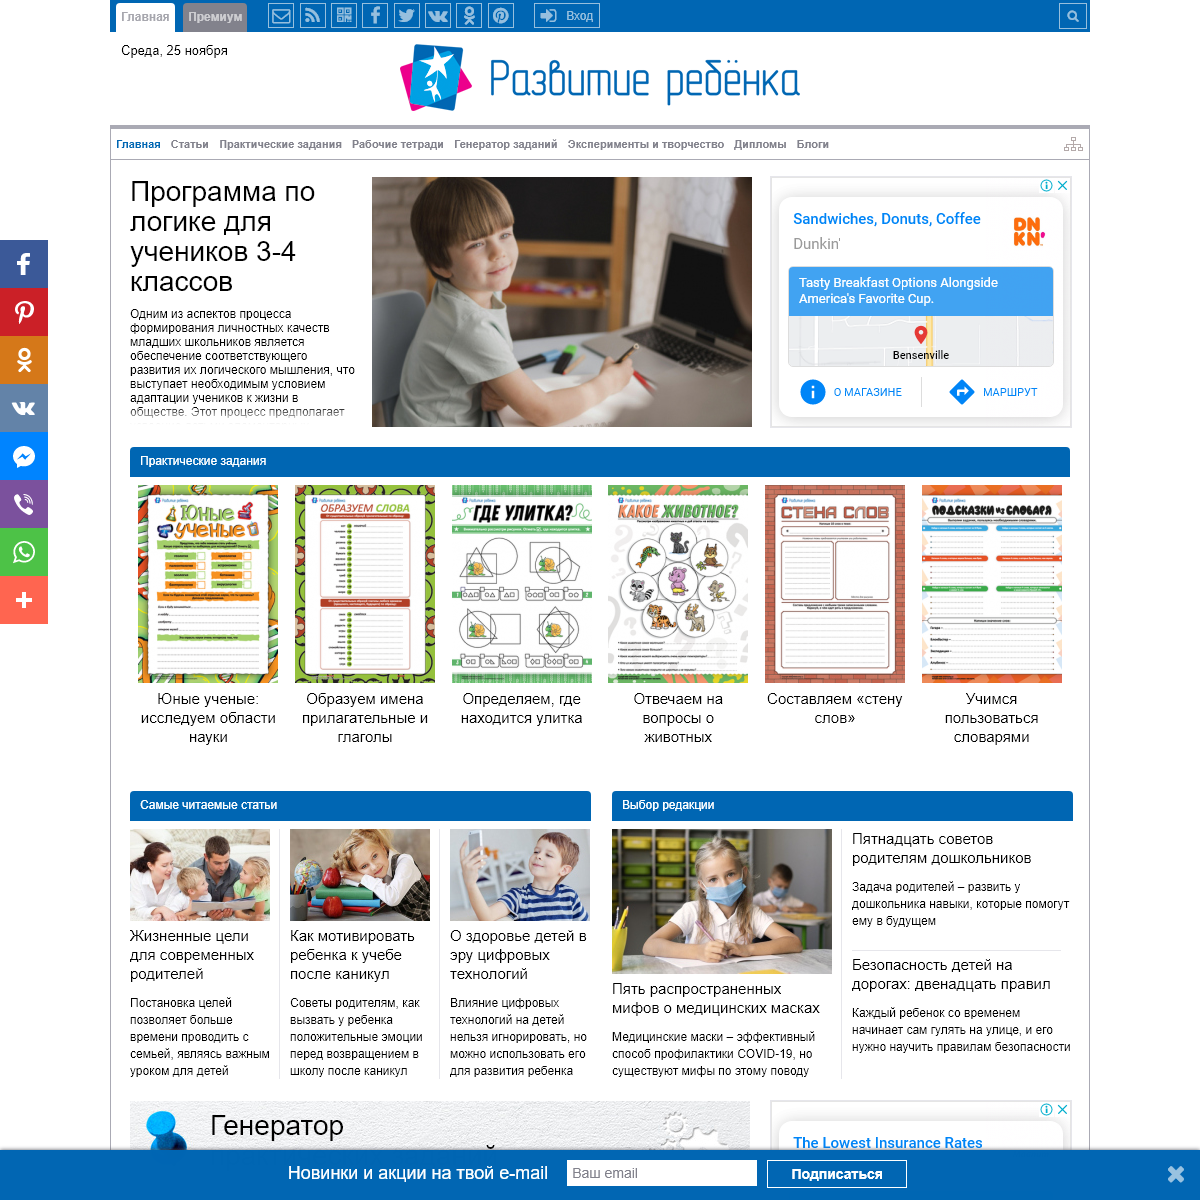 A complete backup of childdevelop.ru